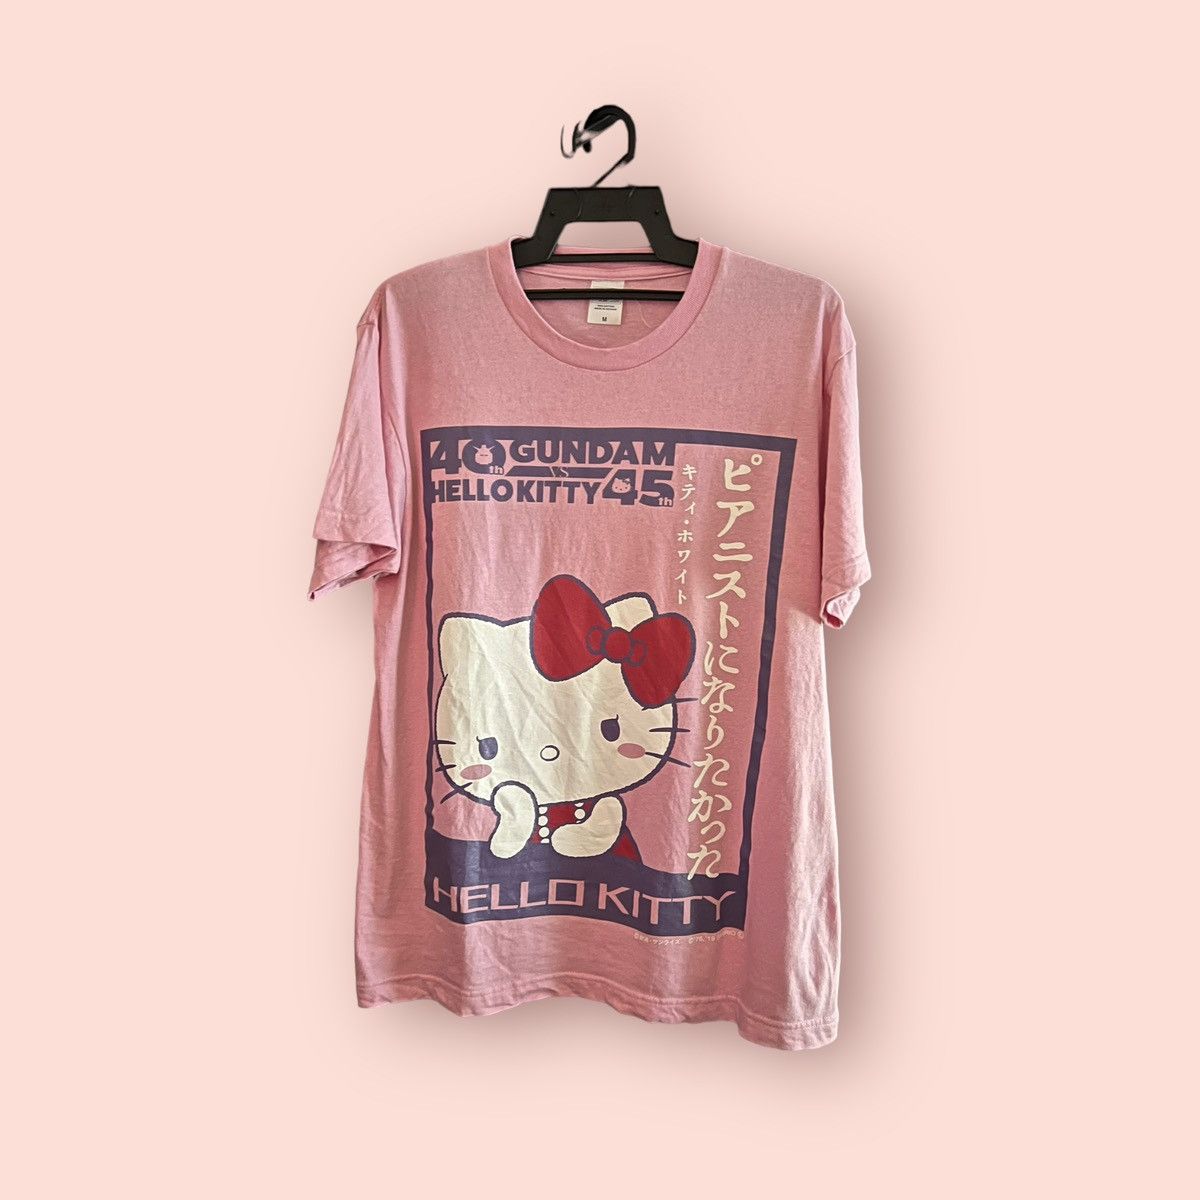 Japanese Brand LIMITED EDITION 2019 GUNDAM X HELLO KITTY PINK TEE IN PINK Size US M / EU 48-50 / 2 - 6 Thumbnail